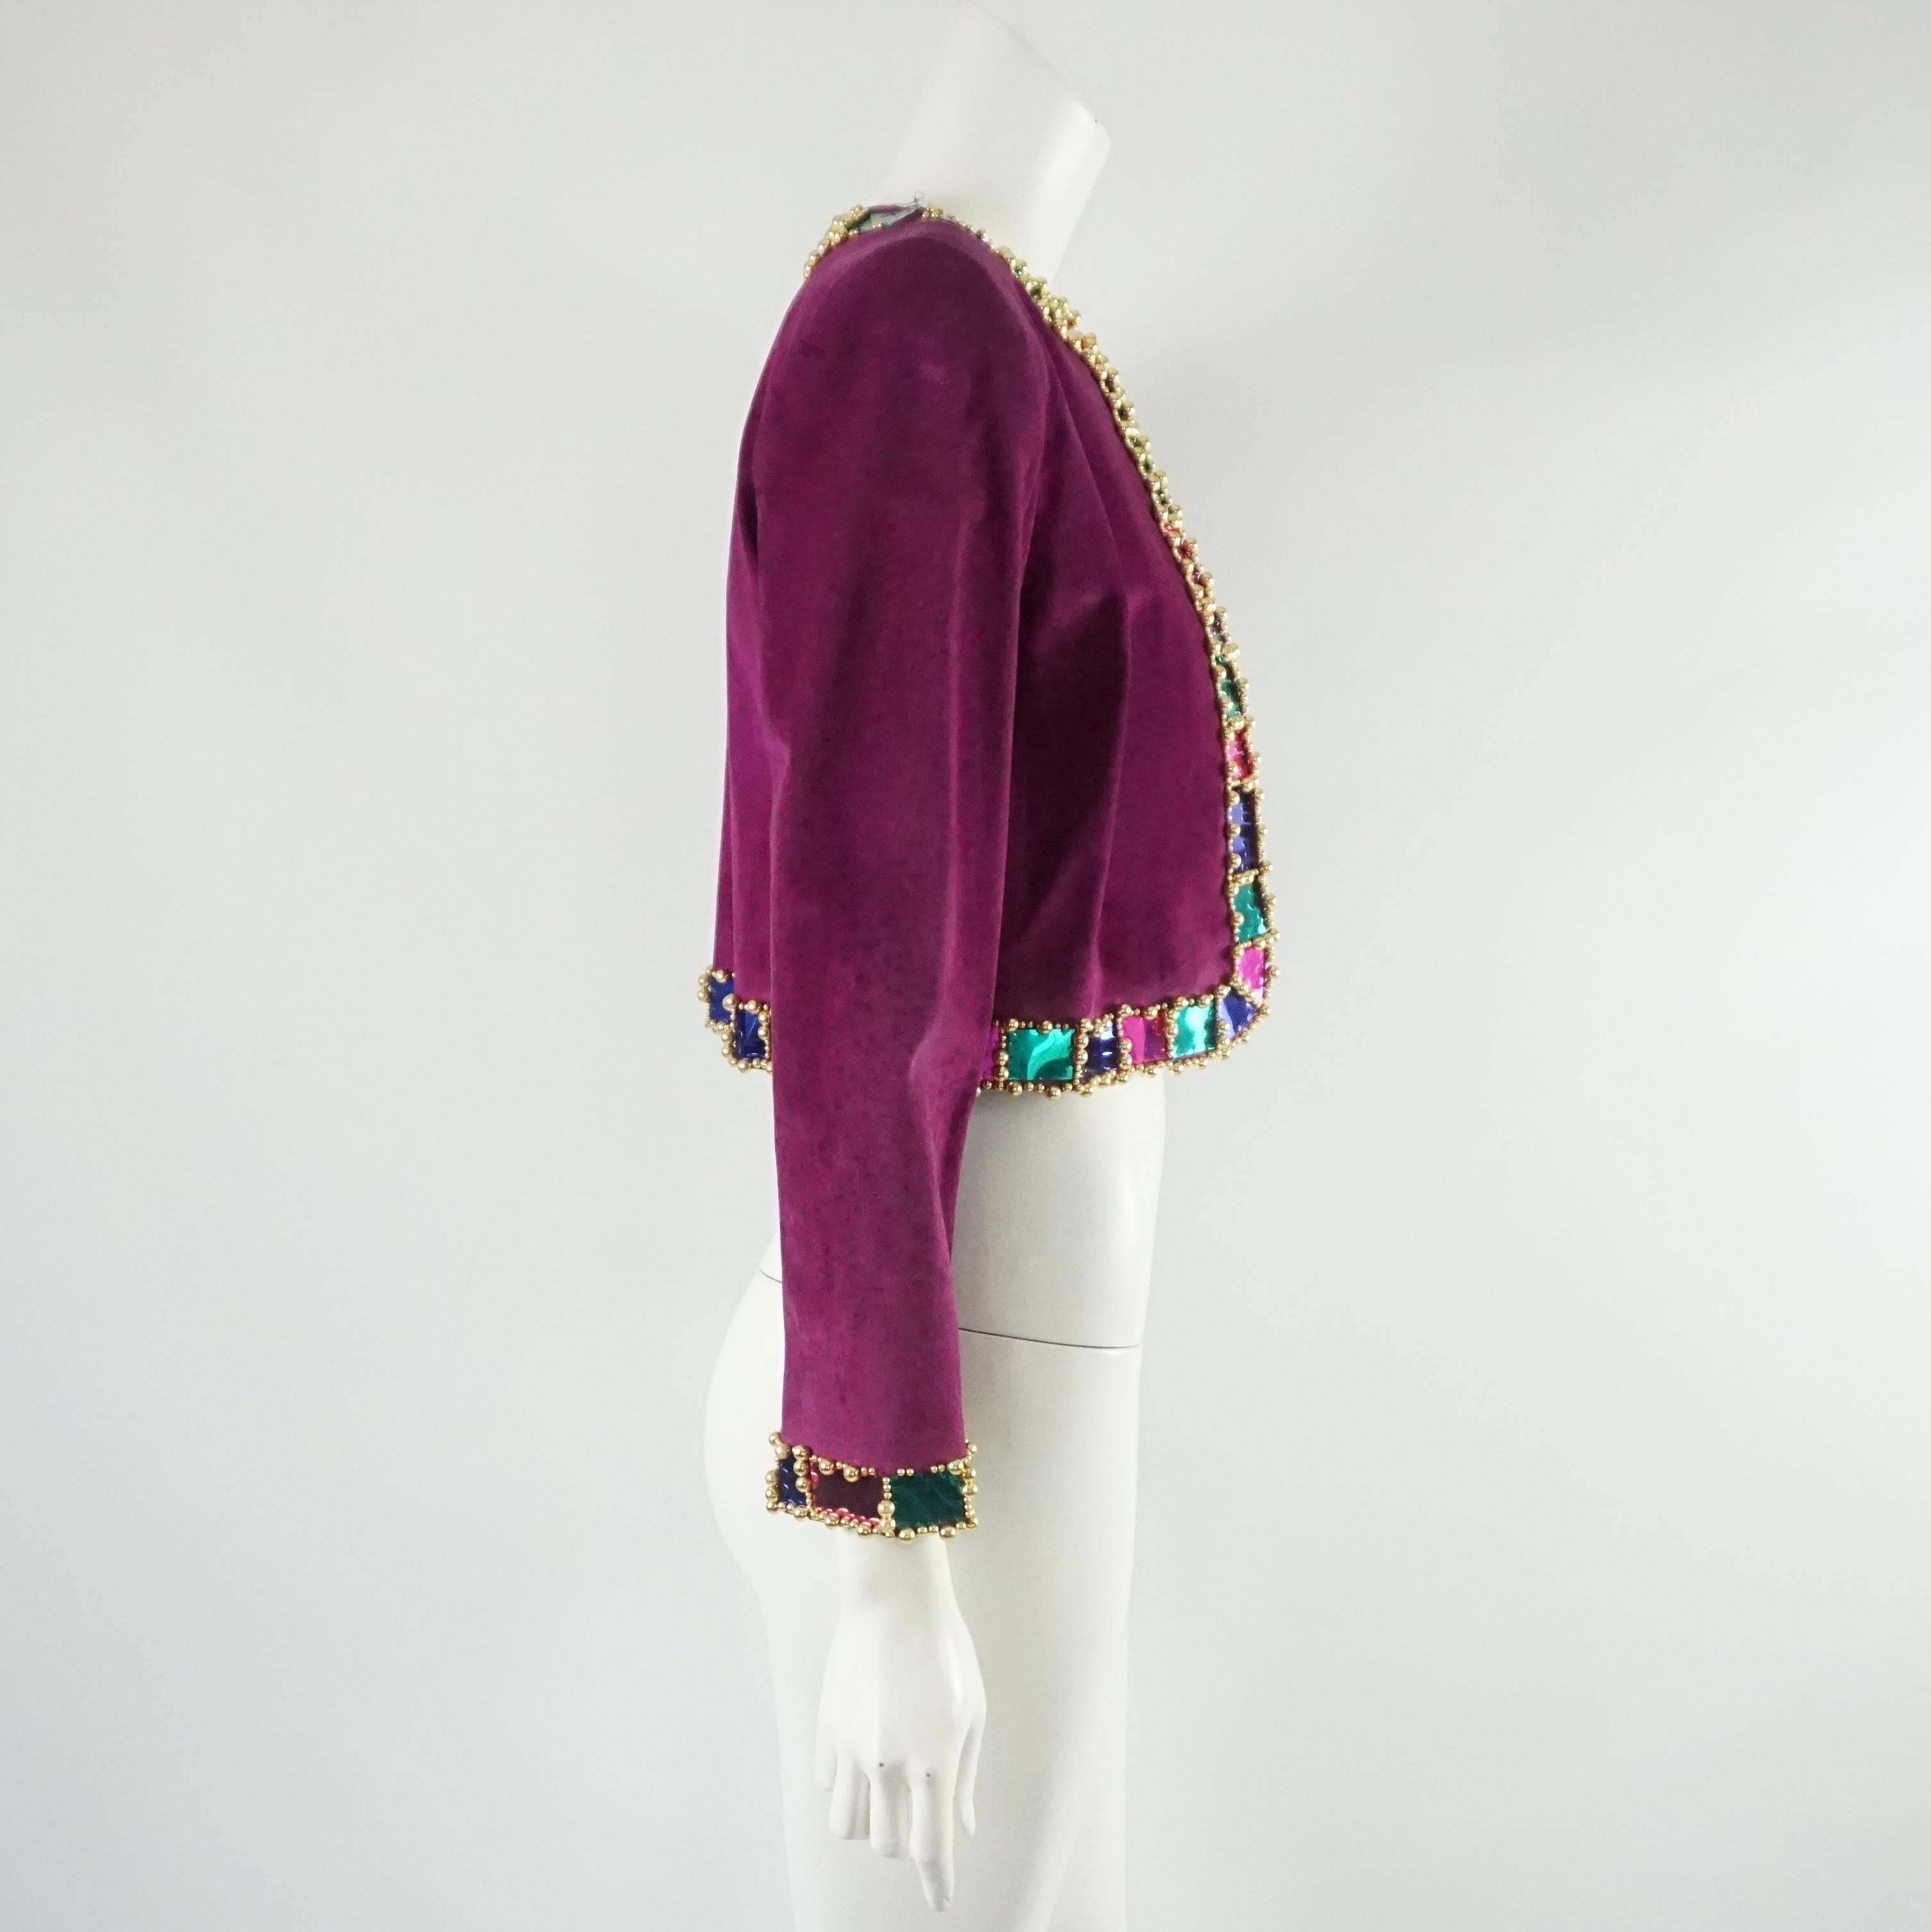 Givenchy Vintage Fuchsia Suede Jacket w/ Beading-34. This vintage Givenchy jacket is in good condition with some wear consistent with use. It is fuchsia  and made of suede. The trim of the jacket has beading attached. This jacket is great for a day